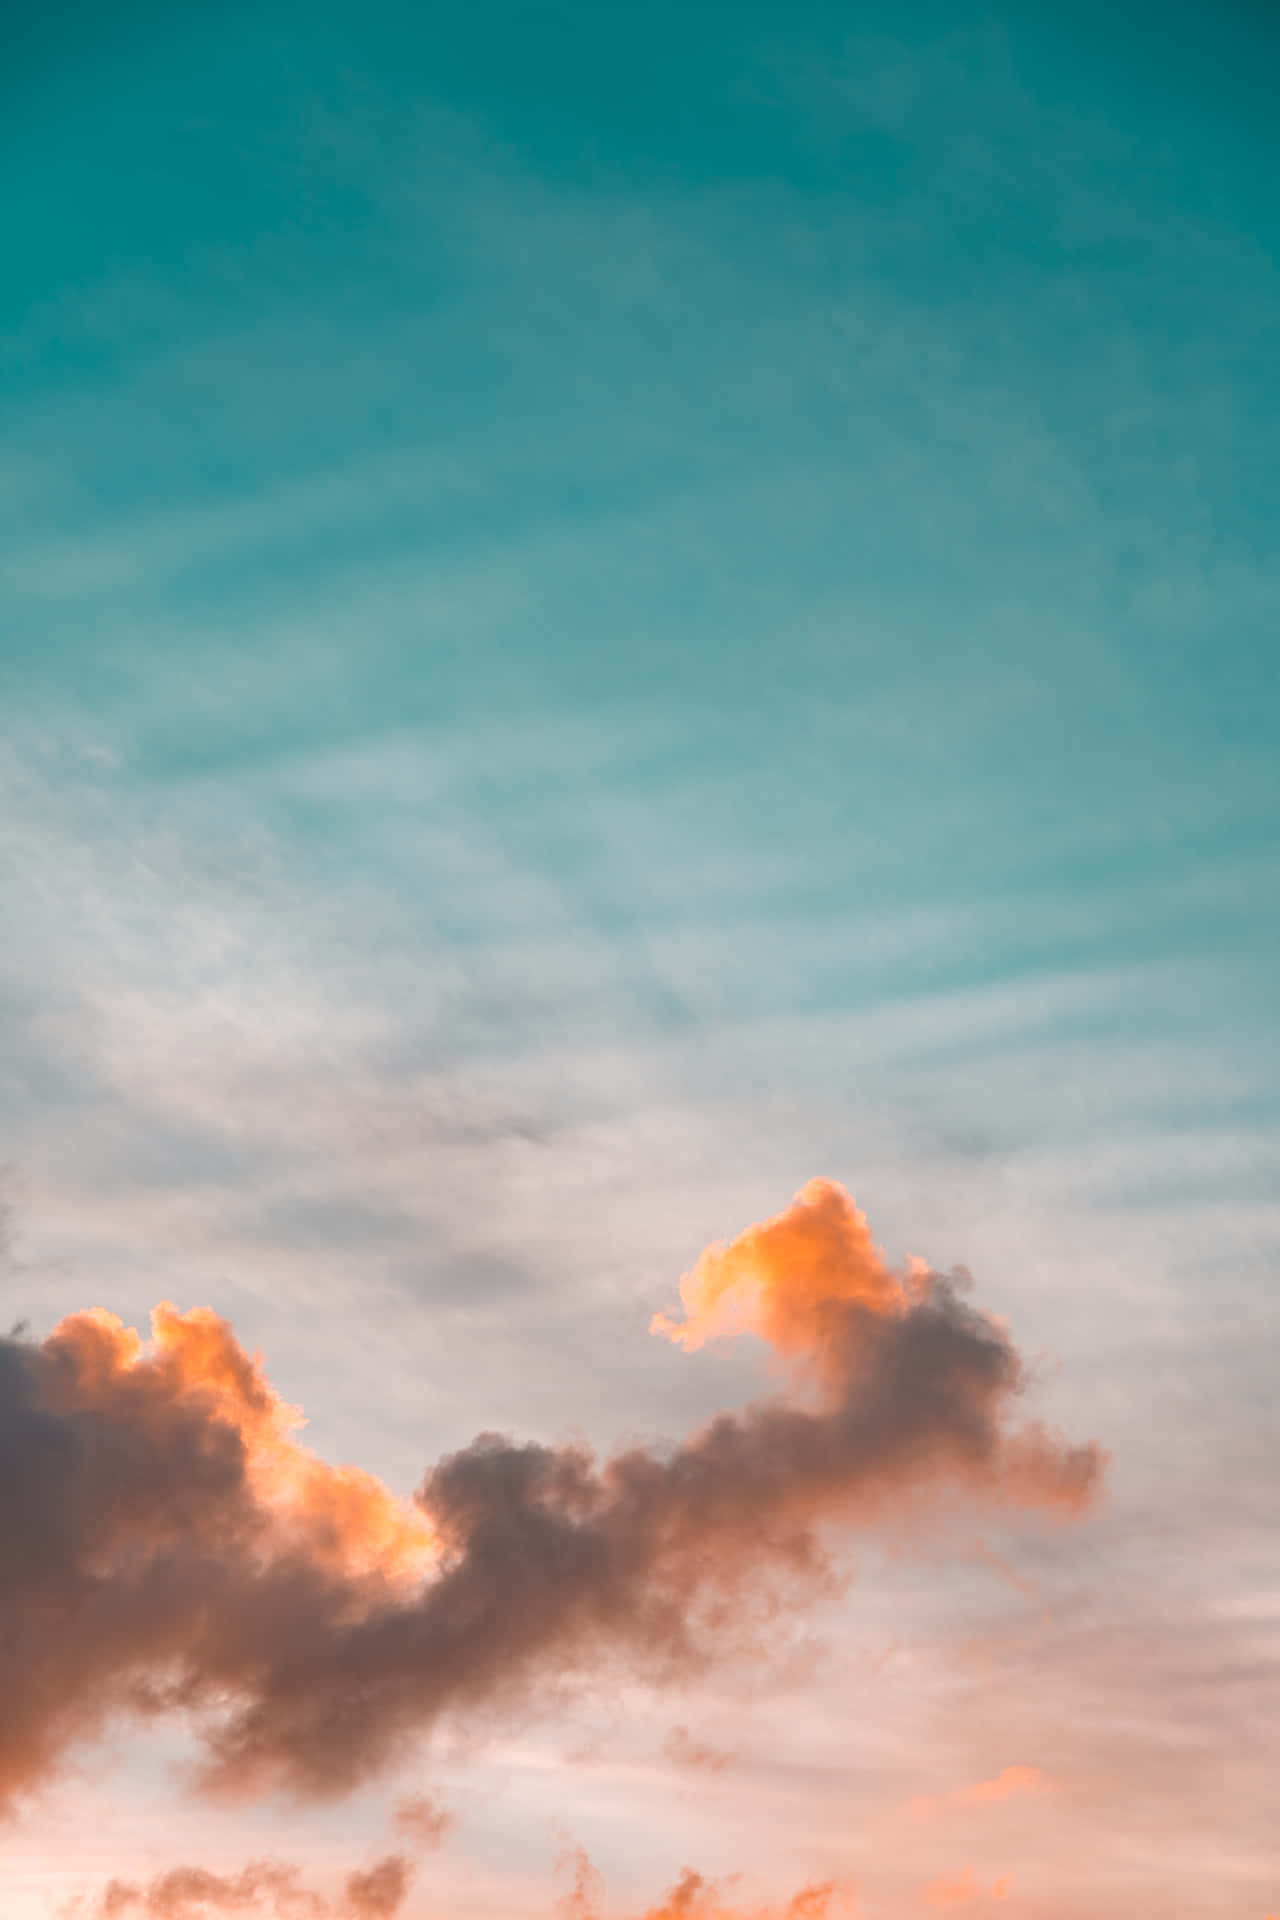 Cloudy Orange And Teal Sky Wallpaper